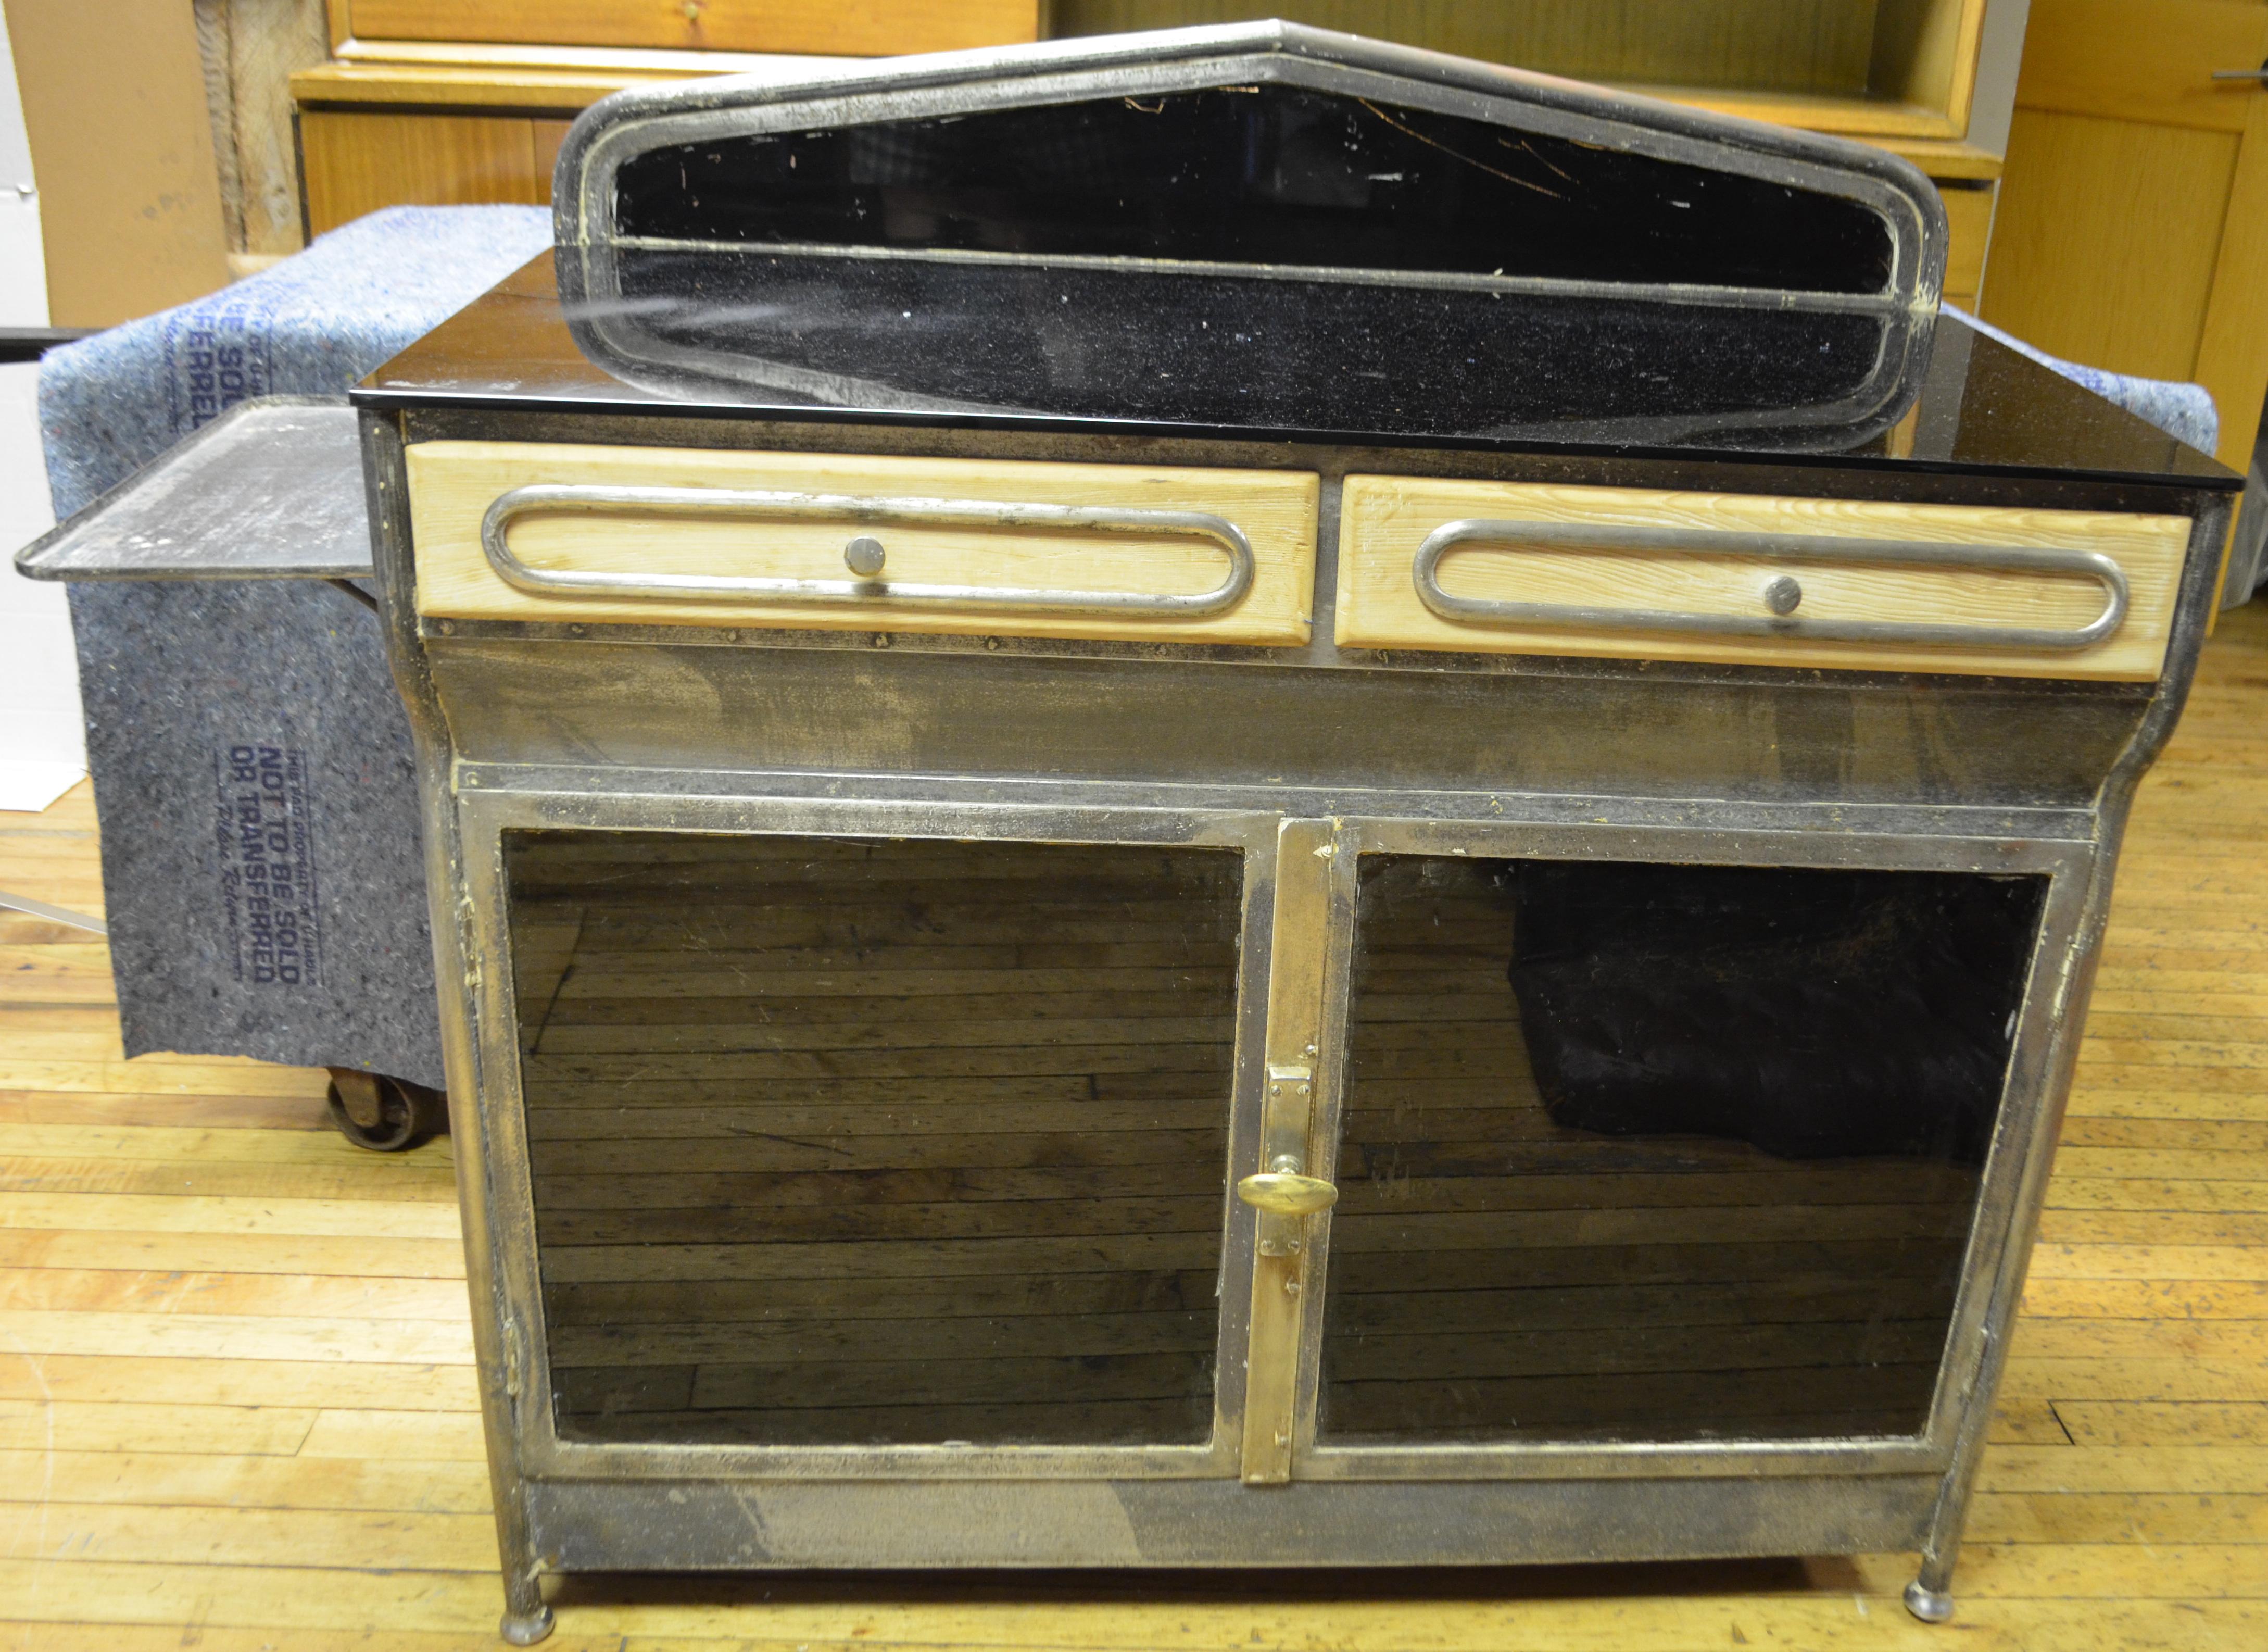 Medical cabinet, Art Deco, circa 1920s. Dark glass mirrors as back splash, counter top and bottom storage doors. Two wooden drawers with steel filagree design and steel shelf on left-hand side. Bottom cabinet offers additional storage. Ideal